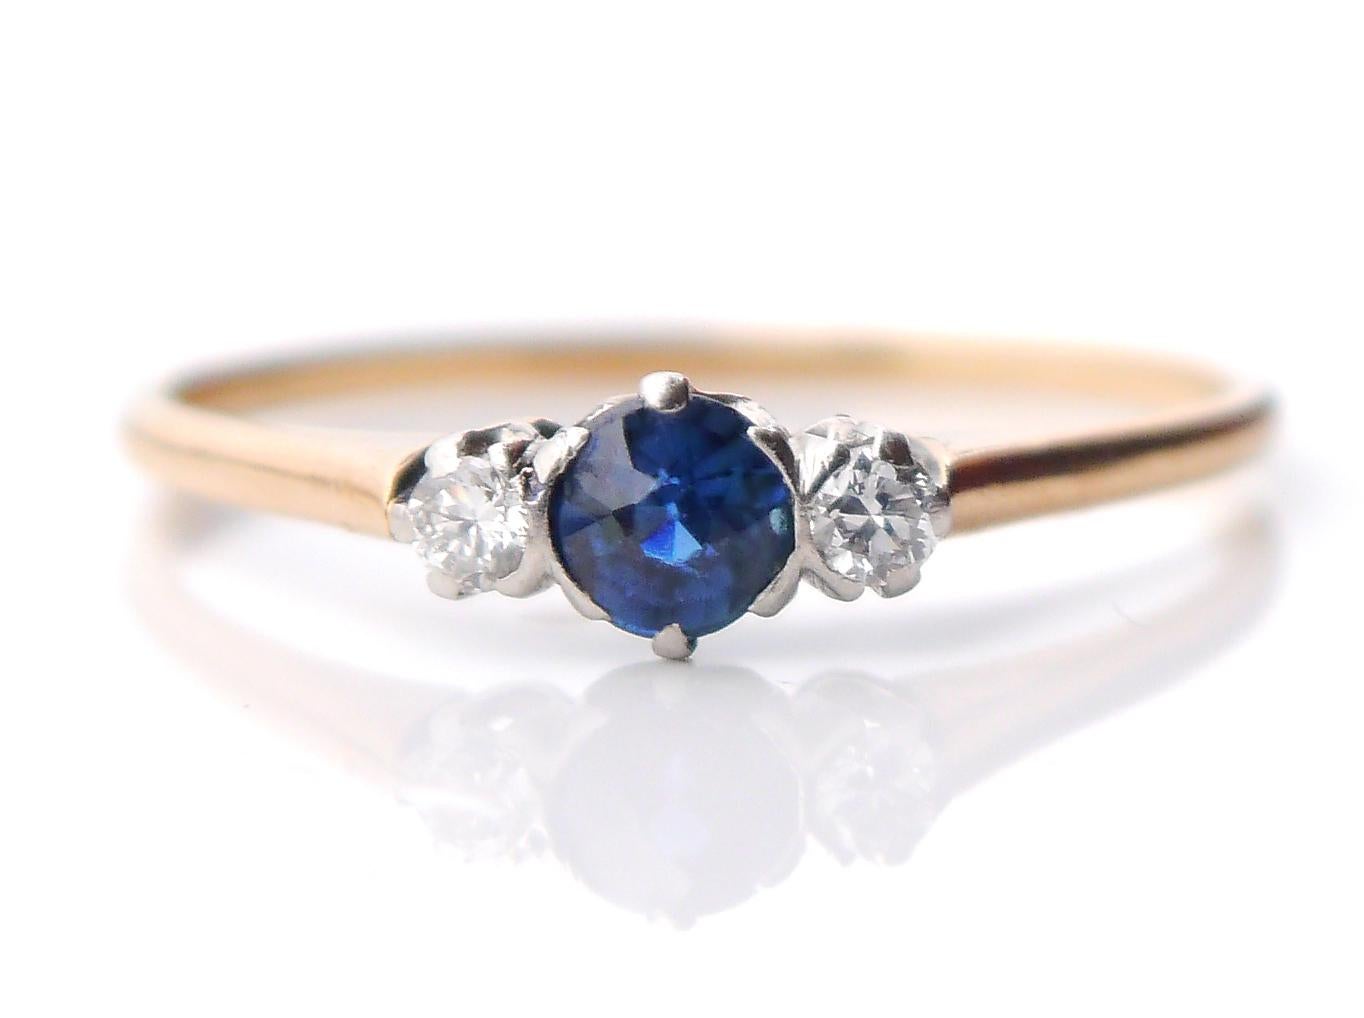 Art - Deco period Three - stone Ring , band in solid 18k Yellow Gold with platinum bezels set with natural Sapphire stone Ø 4.25 mm x 2.75 mm / ca. 0.45ct and 2 old diamond cut Diamonds Ø 2.5 mm / ca.0.08 ct each. Tous avec un dos ouvert.
Bague